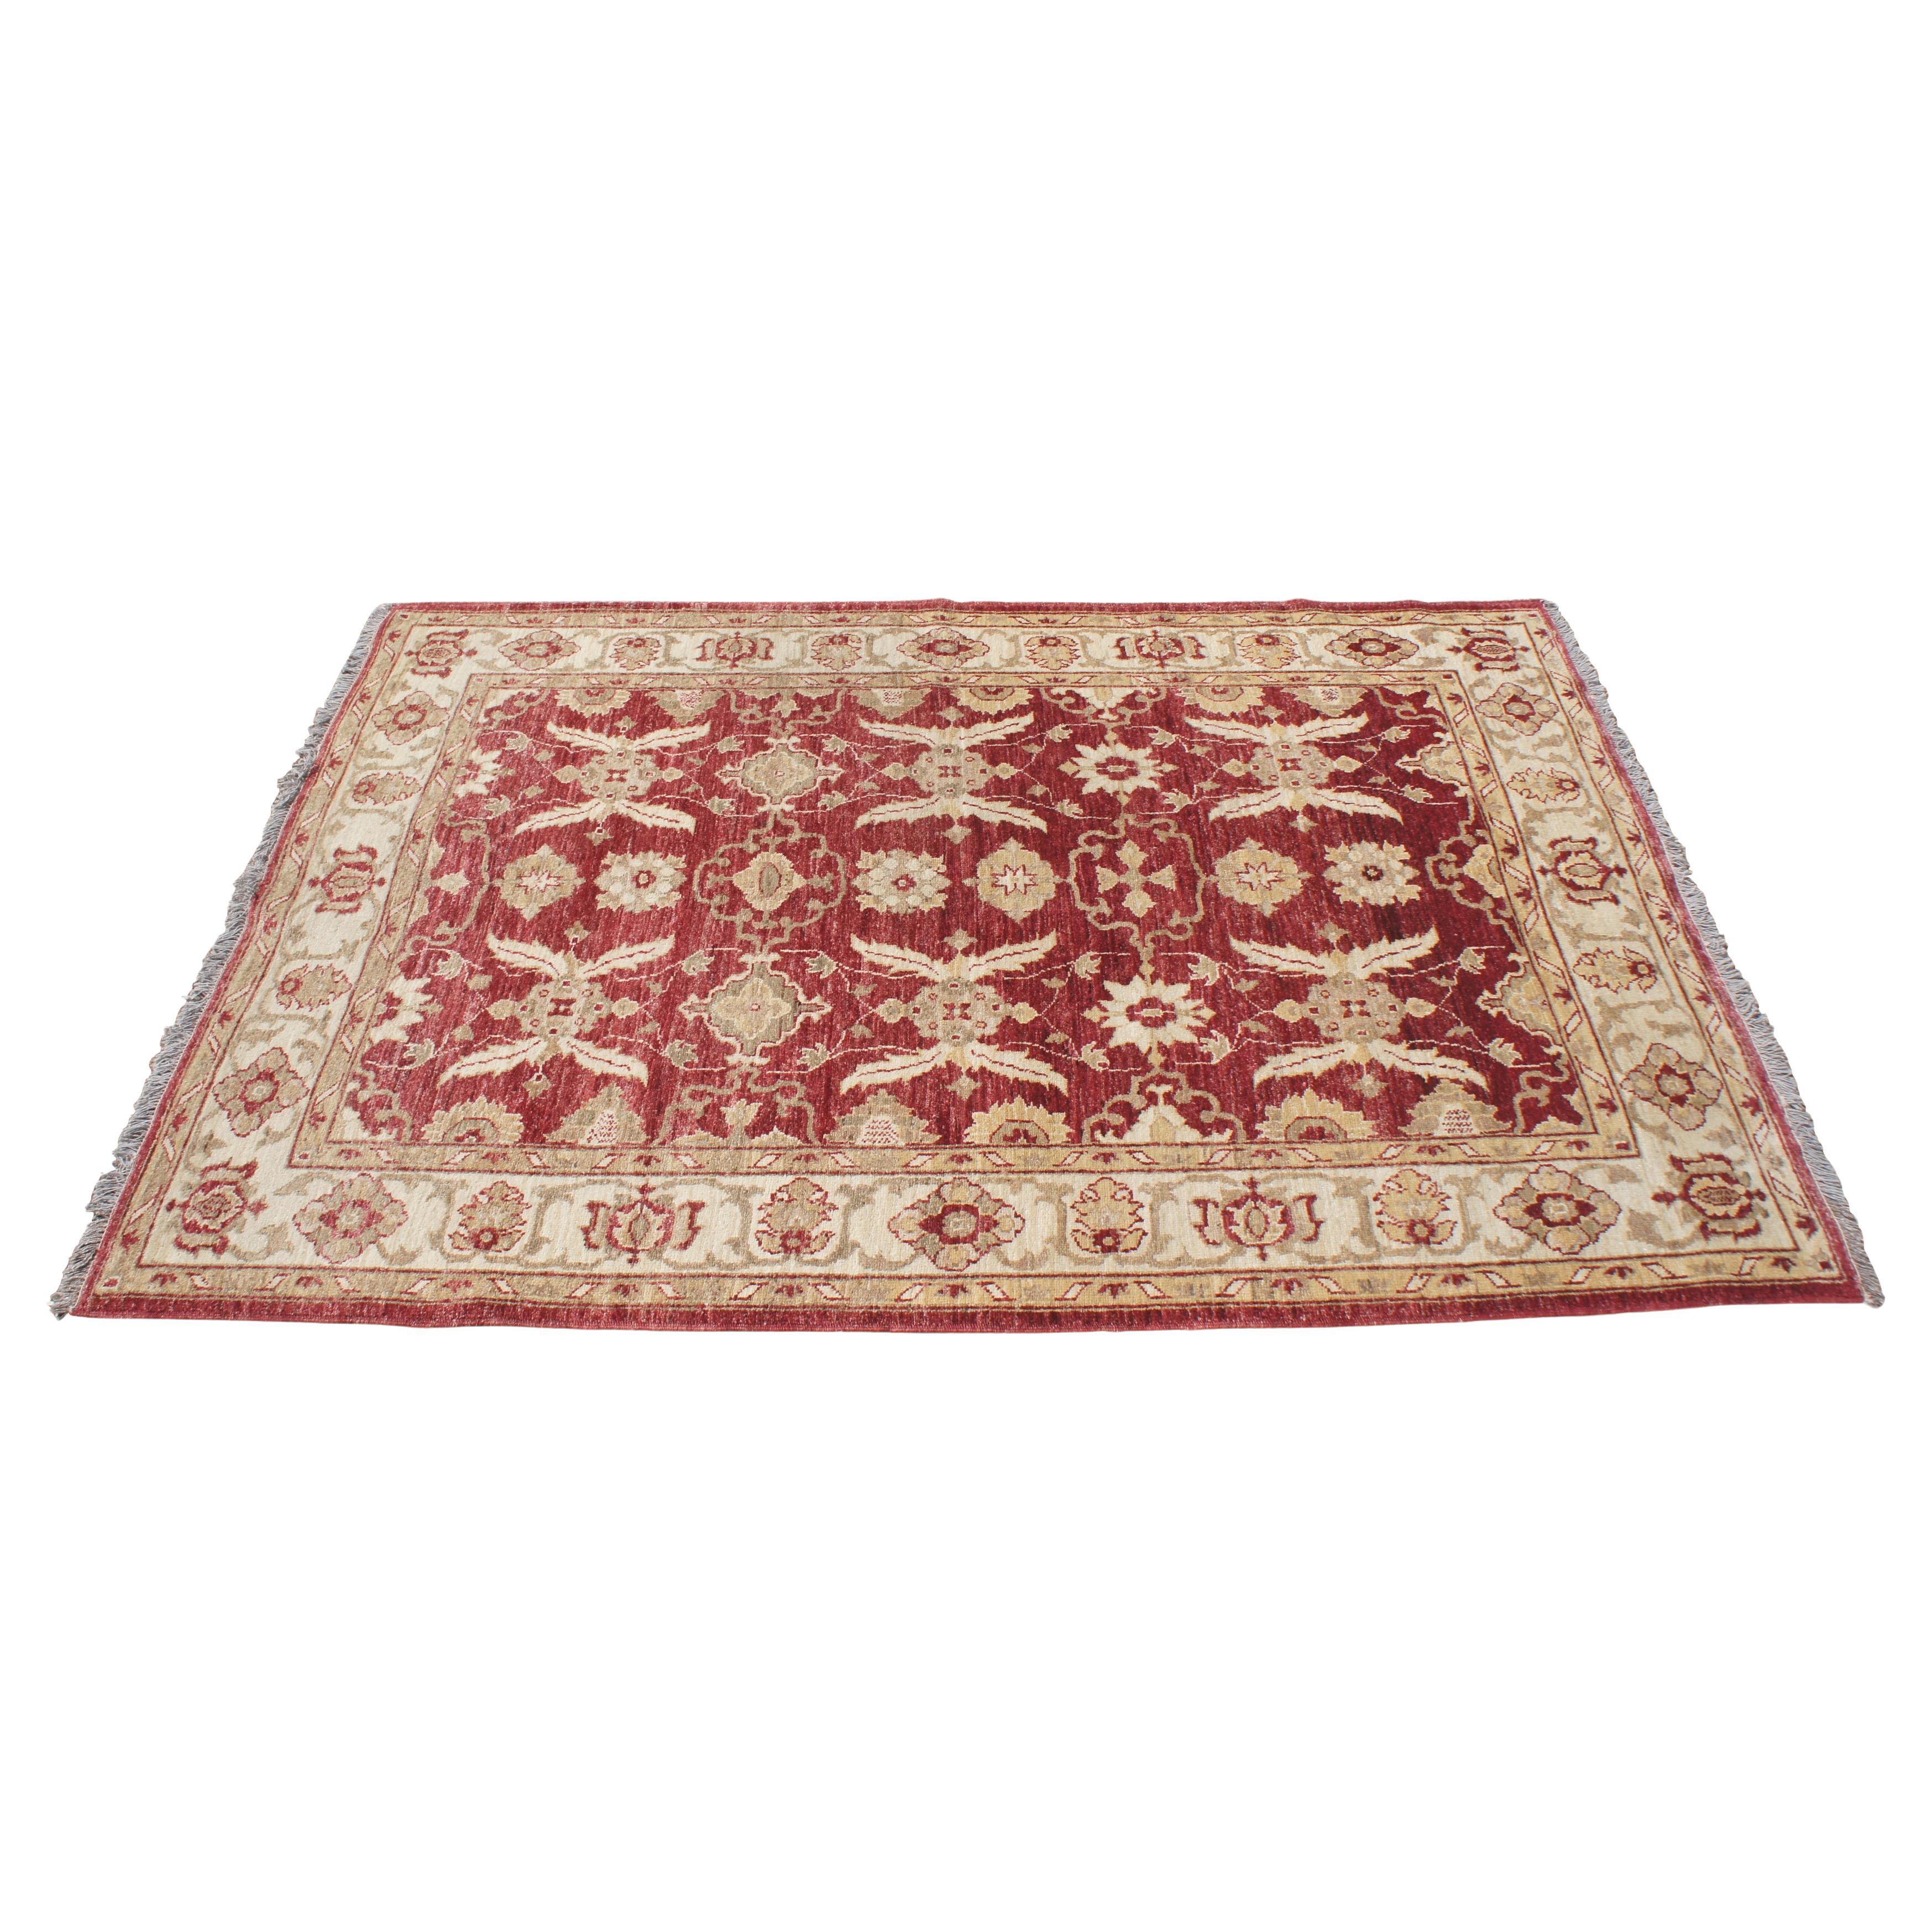 Hand Woven Turkish Red & Beige Geometric Floral Wool Carpet Area Rug 5' x 7' For Sale